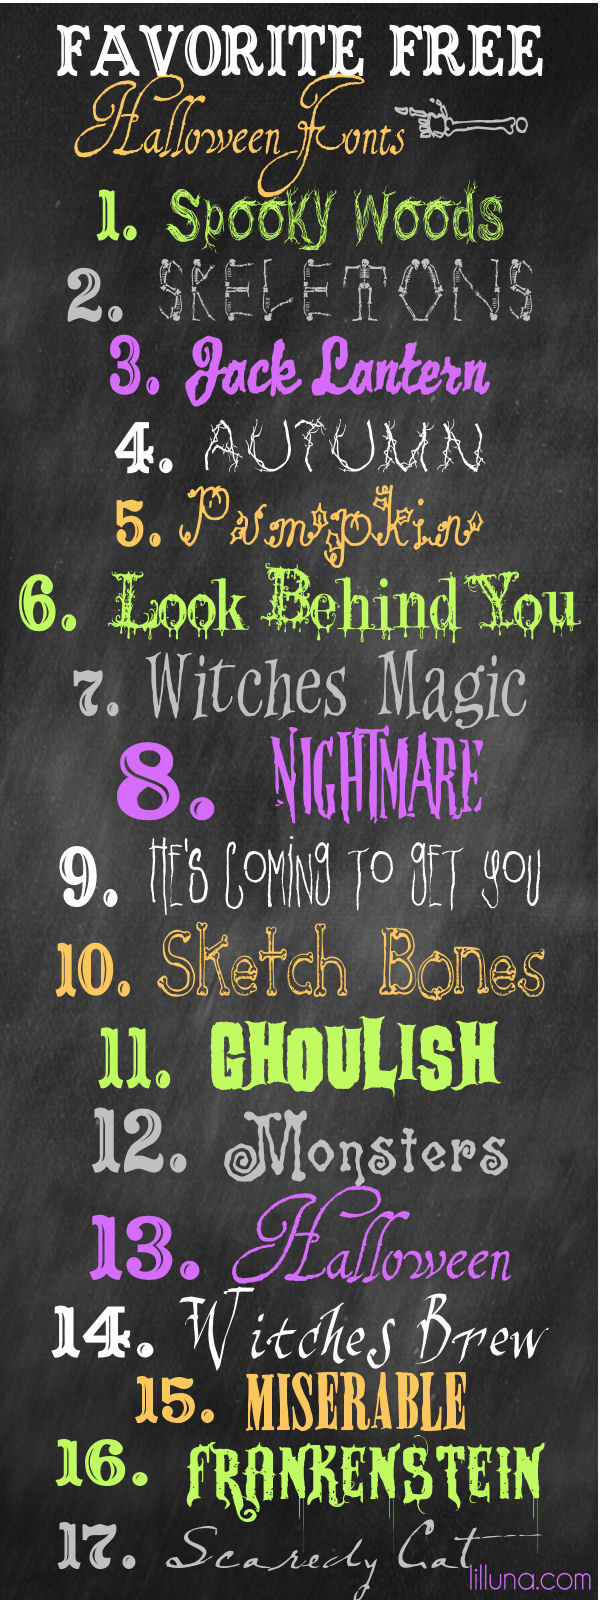 Favorite Free Halloween Fonts on { lilluna.com } Lots of spooky fonts to download and use!